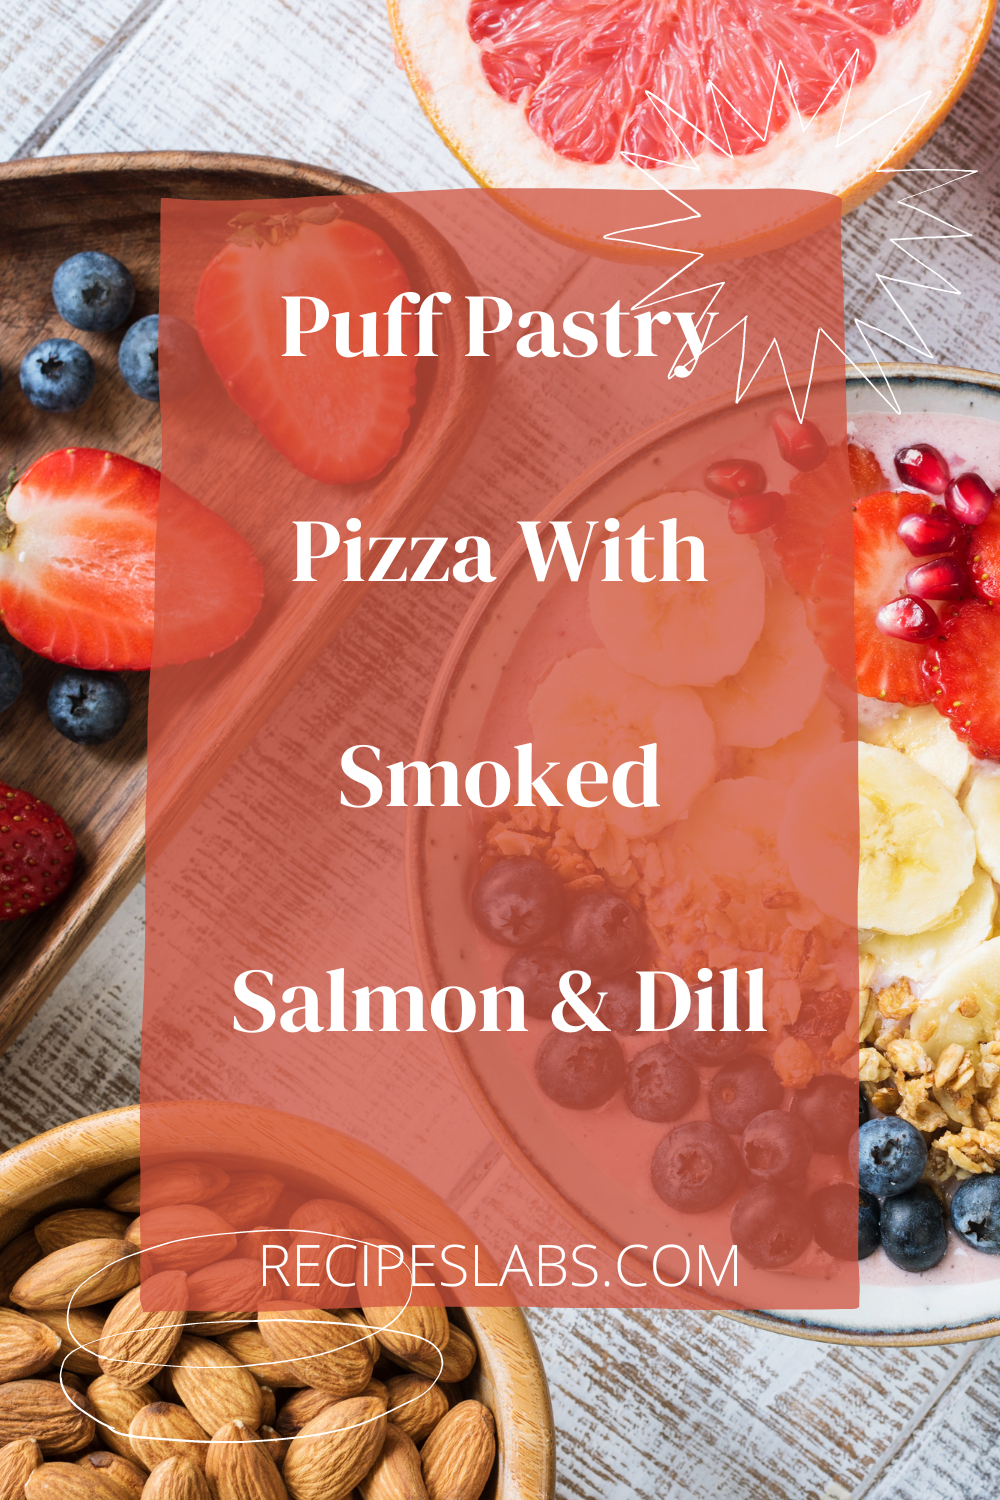 Puff Pastry Pizza With Smoked Salmon & Dill